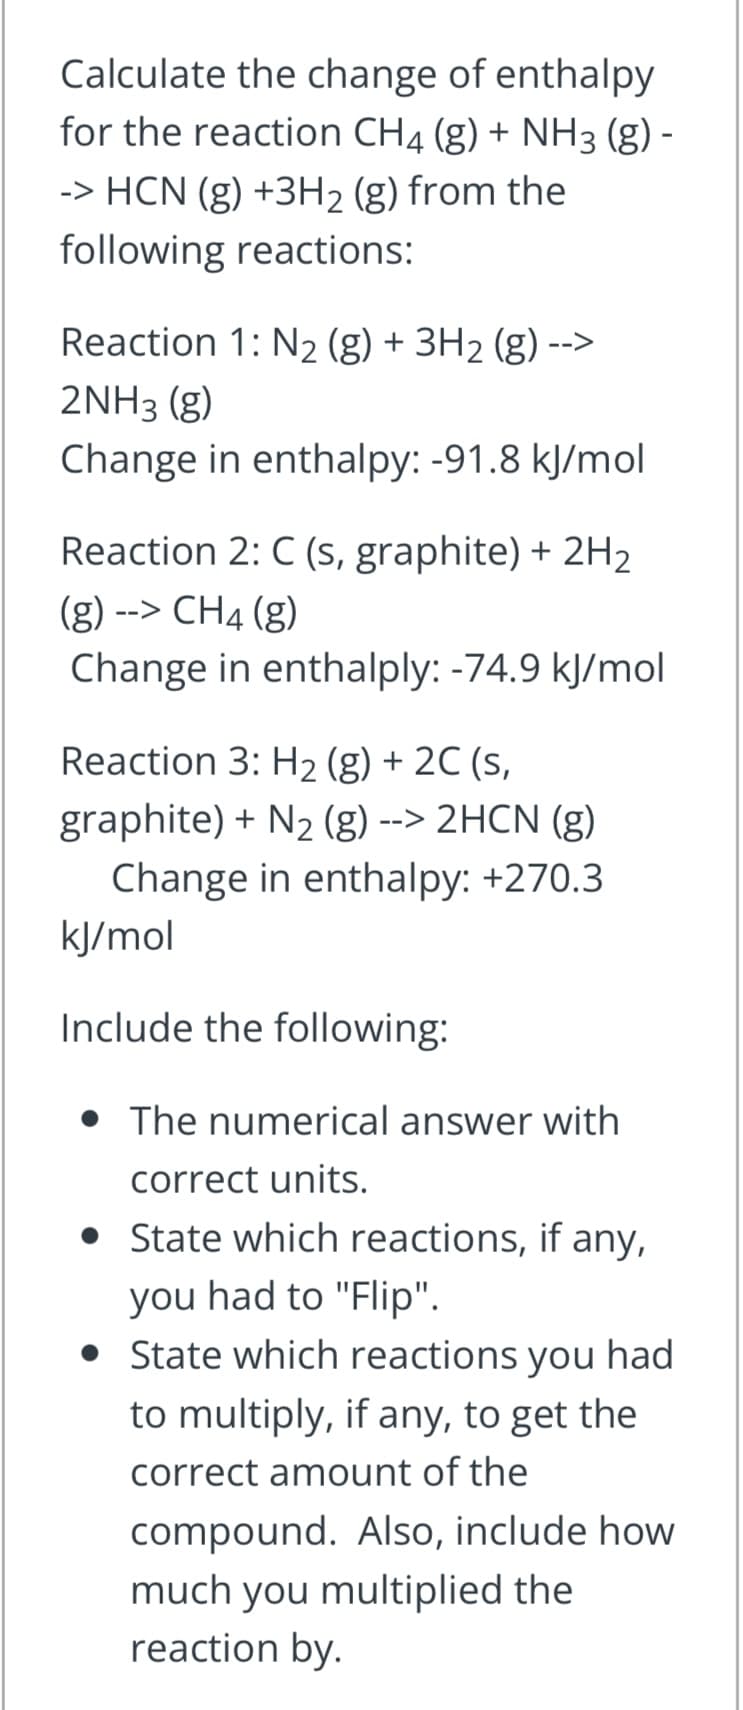 Calculate the change of enthalpy
for the reaction CH4 (g) + NH3 (g) -
-> HCN (g) +3H2 (g) from the
following reactions:
Reaction 1: N2 (g) + 3H2 (g) -->
2NH3 (g)
Change in enthalpy: -91.8 kJ/mol
Reaction 2: C (s, graphite) + 2H2
(g) --> CH4 (g)
Change in enthalply: -74.9 kJ/mol
Reaction 3: H2 (g) + 2C (s,
graphite) + N2 (g) --> 2HCN (g)
Change in enthalpy: +270.3
kJ/mol
Include the following:
The numerical answer with
correct units.
• State which reactions, if any,
you had to "Flip".
• State which reactions you had
to multiply, if any, to get the
correct amount of the
compound. Also, include how
much you multiplied the
reaction by.
